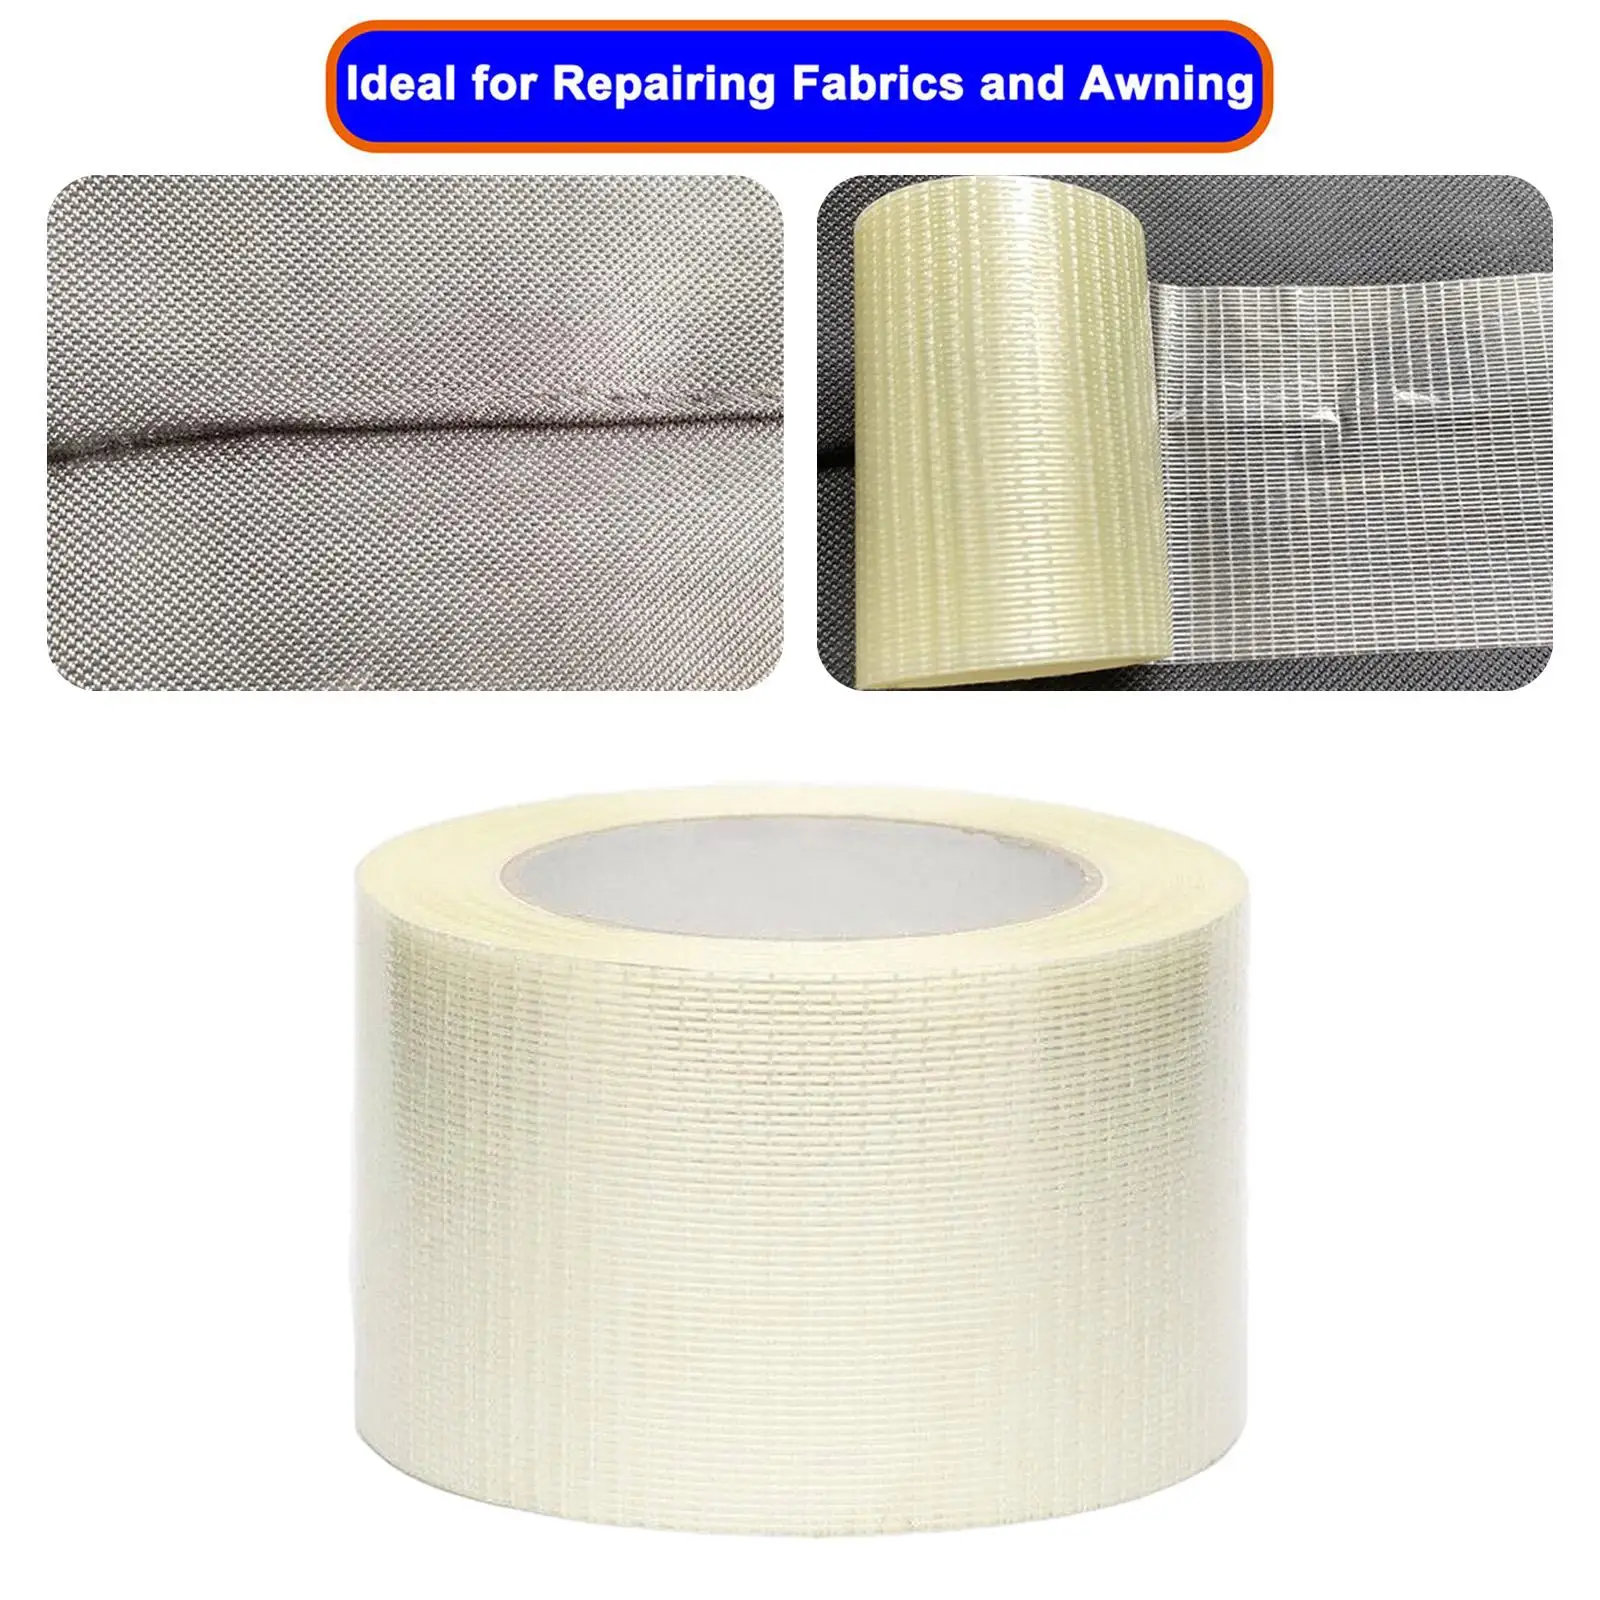 Awning Cloth Repair Tape Multi Functional Tent Repair Tape for Canvas Cover Cloth Home Improvement Outdoor Tent Repairing Holes